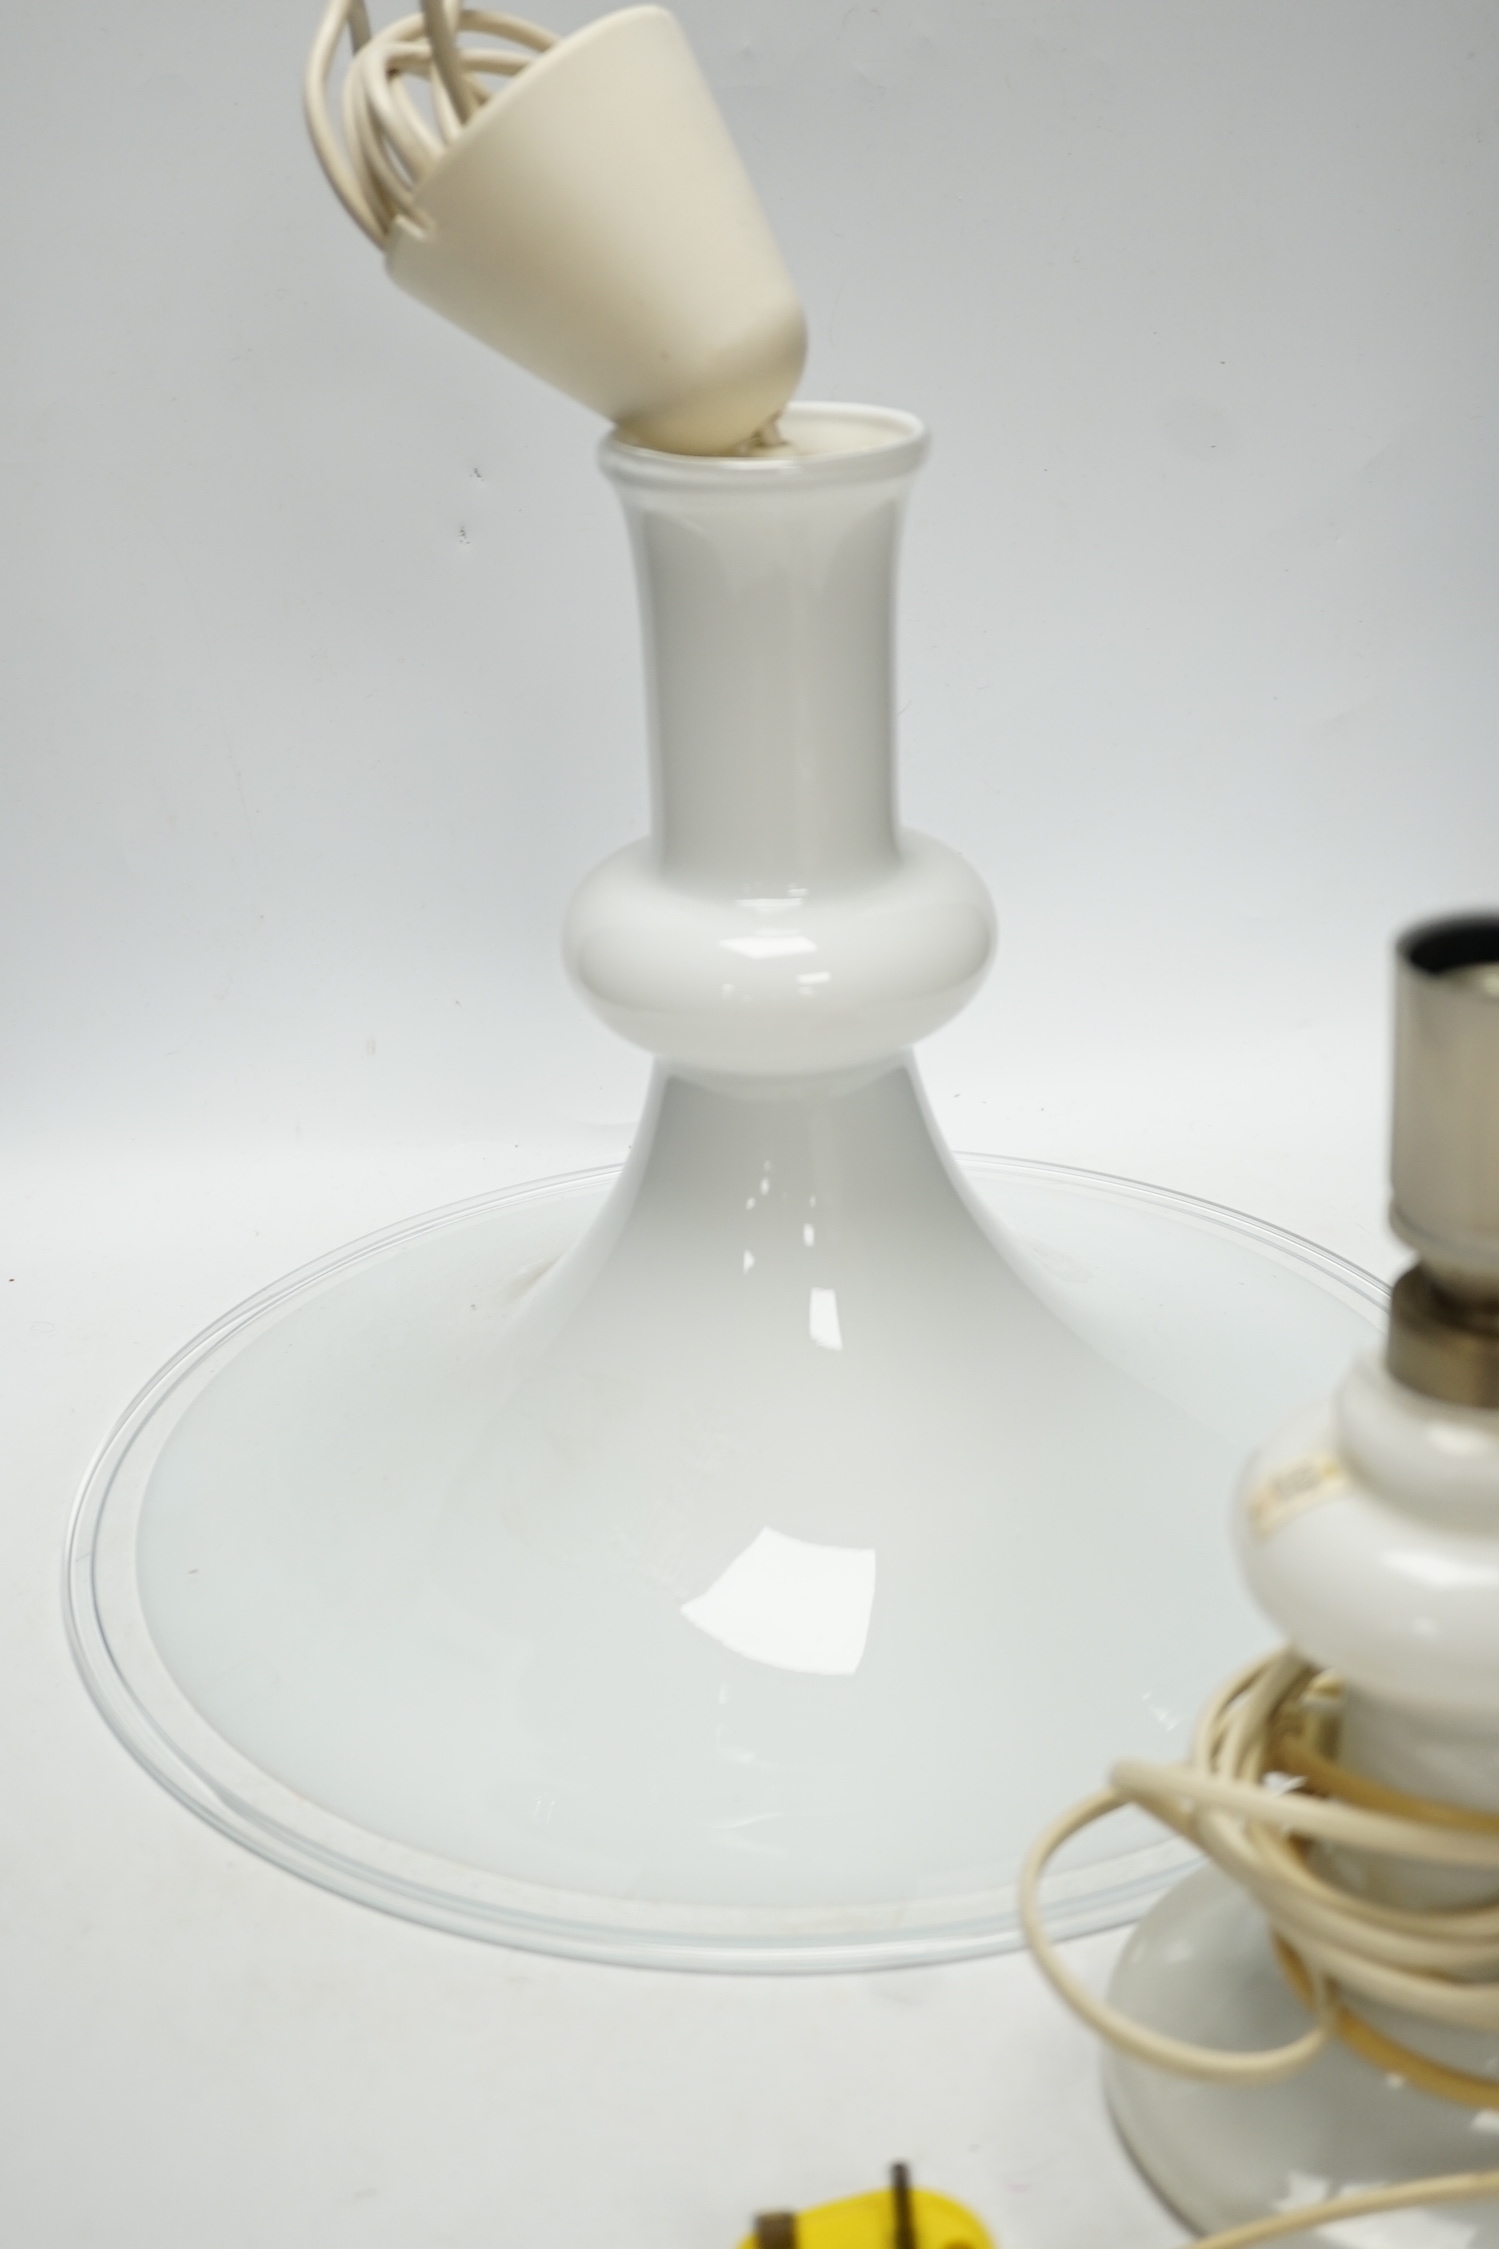 A Holmgaard by Michael Bang opaque white glass pendant ceiling lamp, 40cm diameter, and a Neil Thorssen white glass table lamp